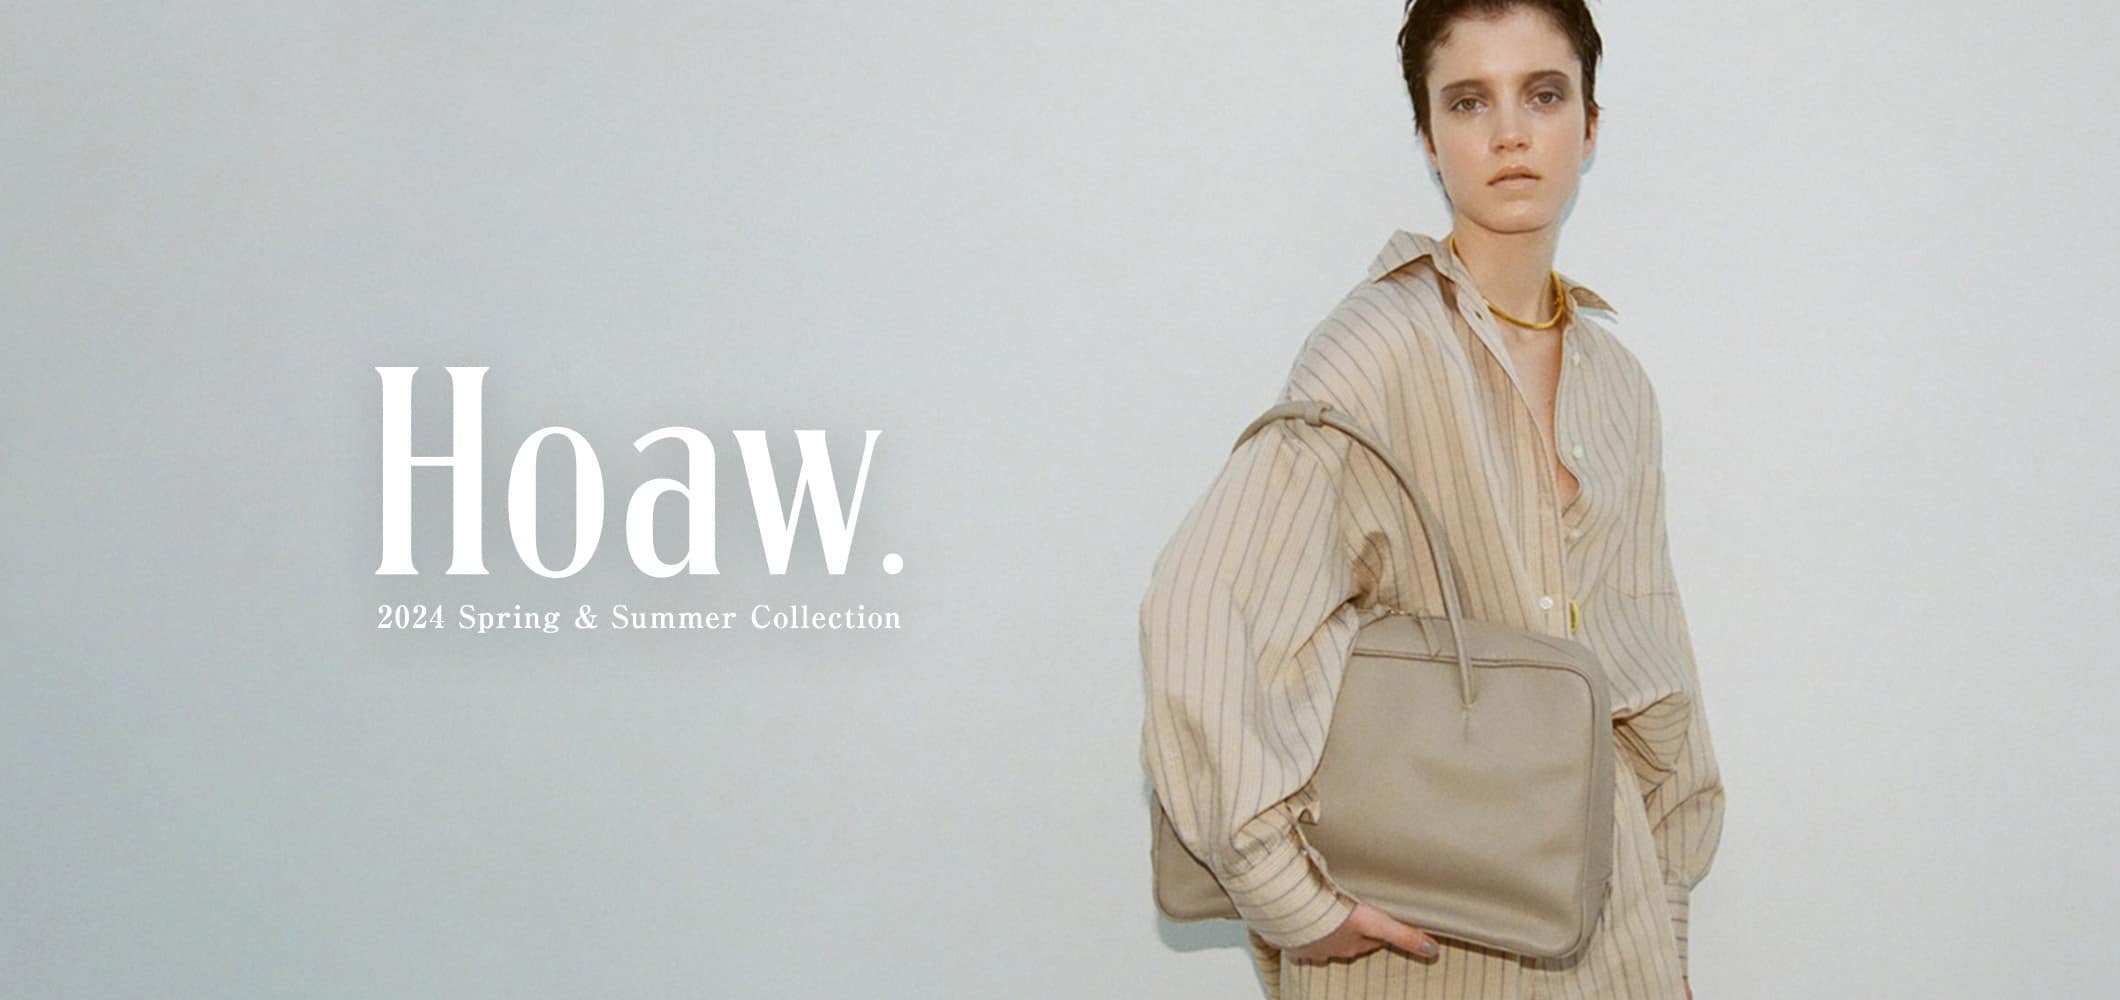 『Hoaw. (ハァウ)』2024 Spring ＆ Summer Collection